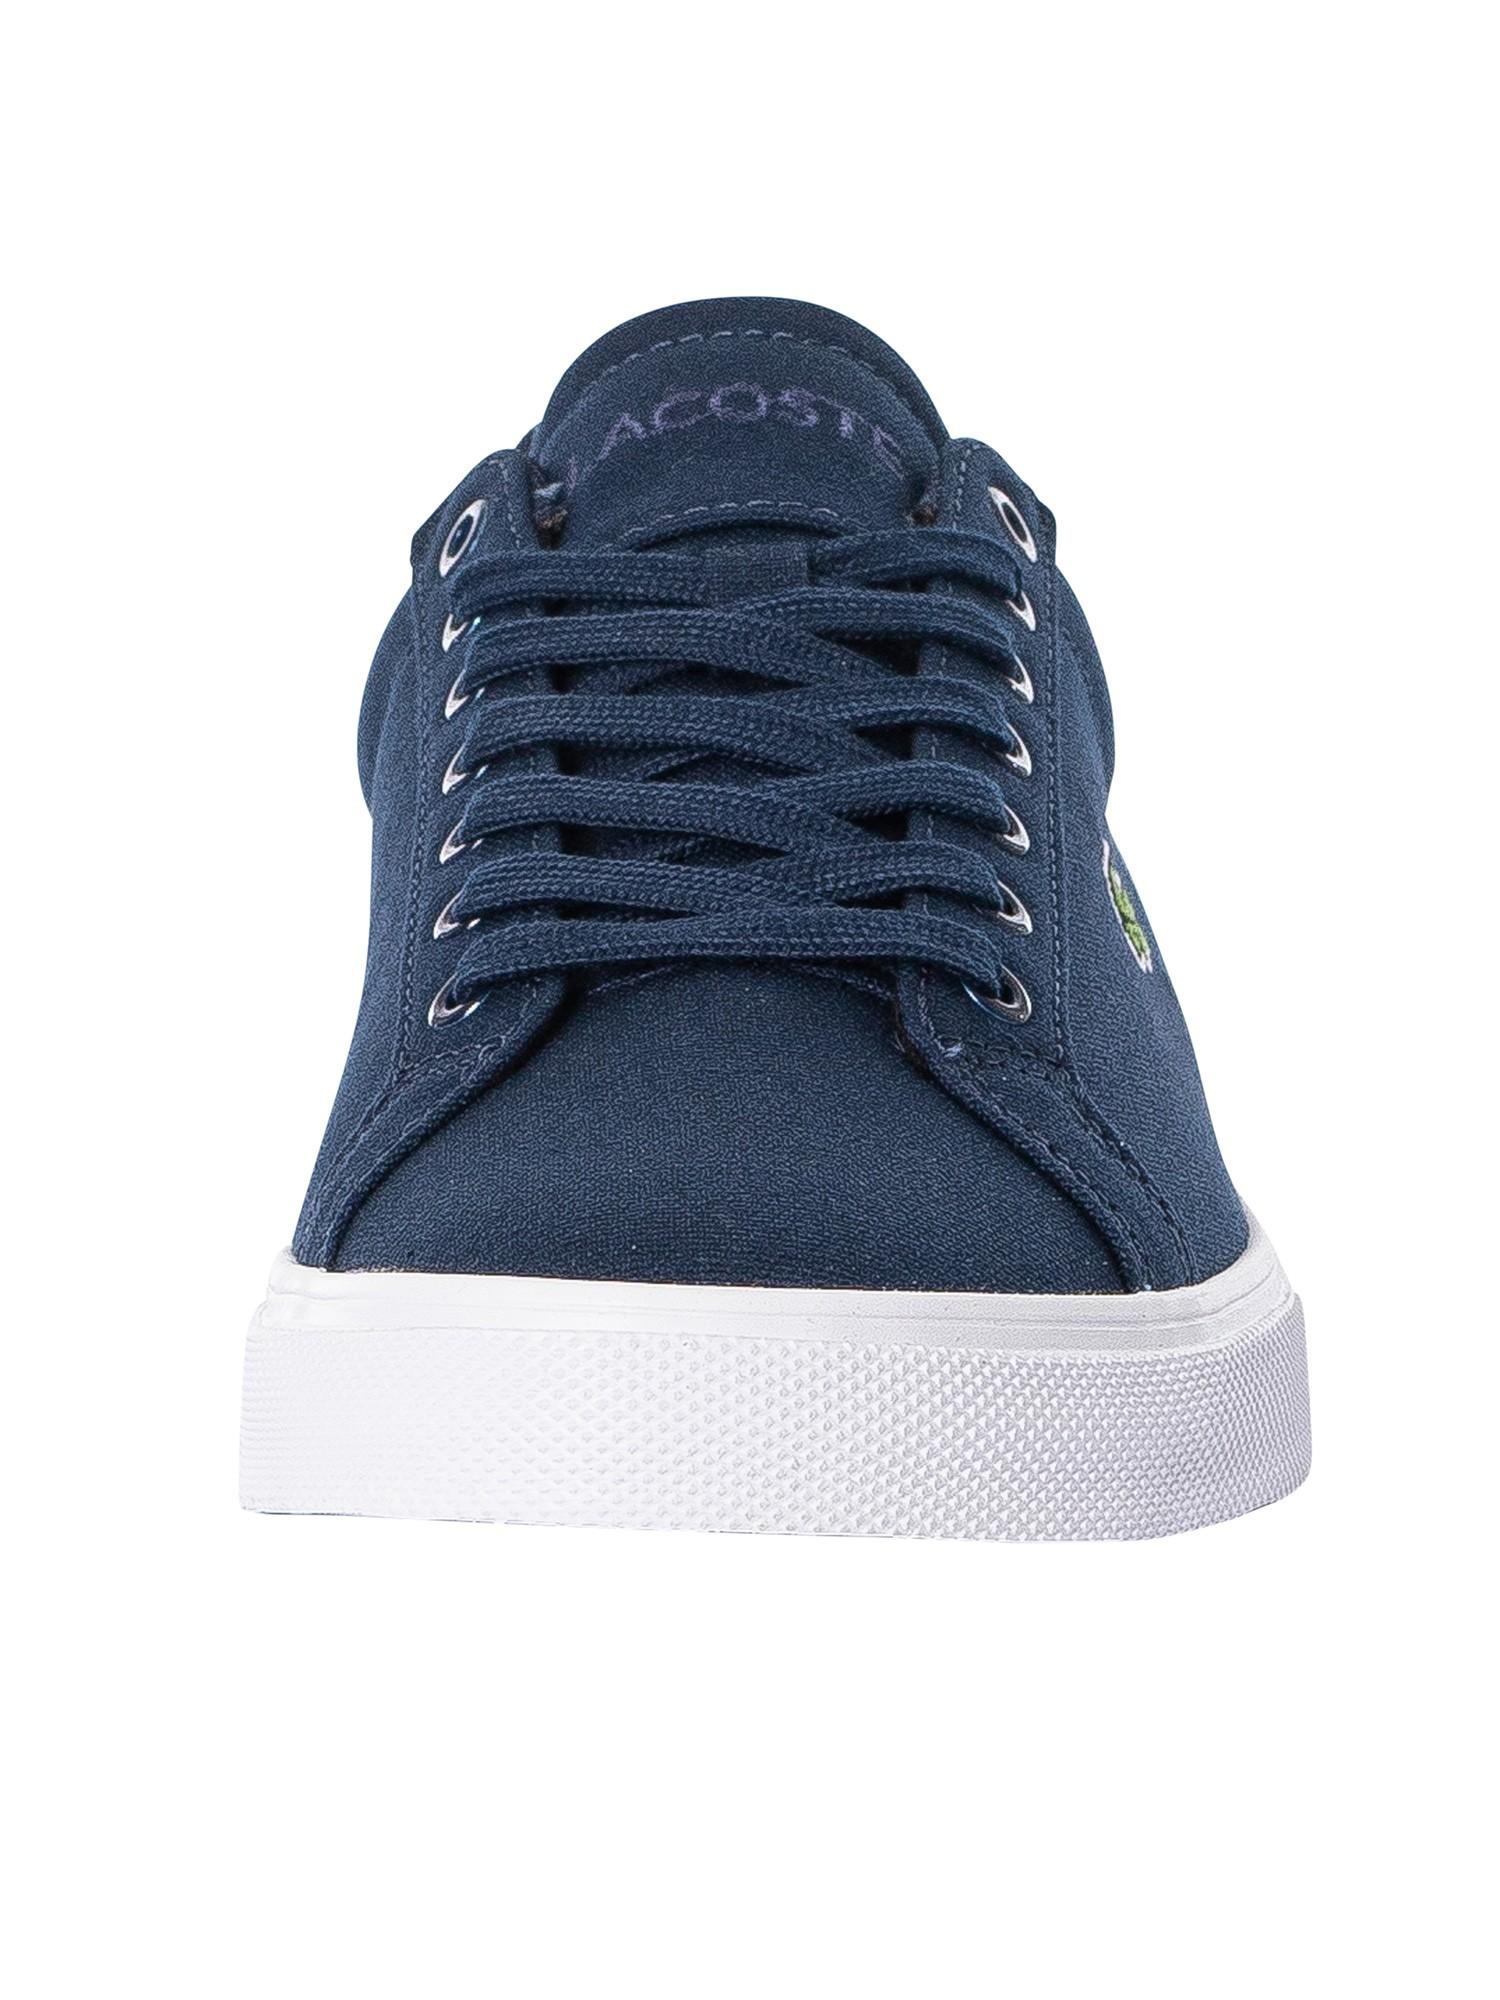 Lacoste Lerond Pro Bl 123 1 Cma Canvas Trainers in Blue for Men | Lyst